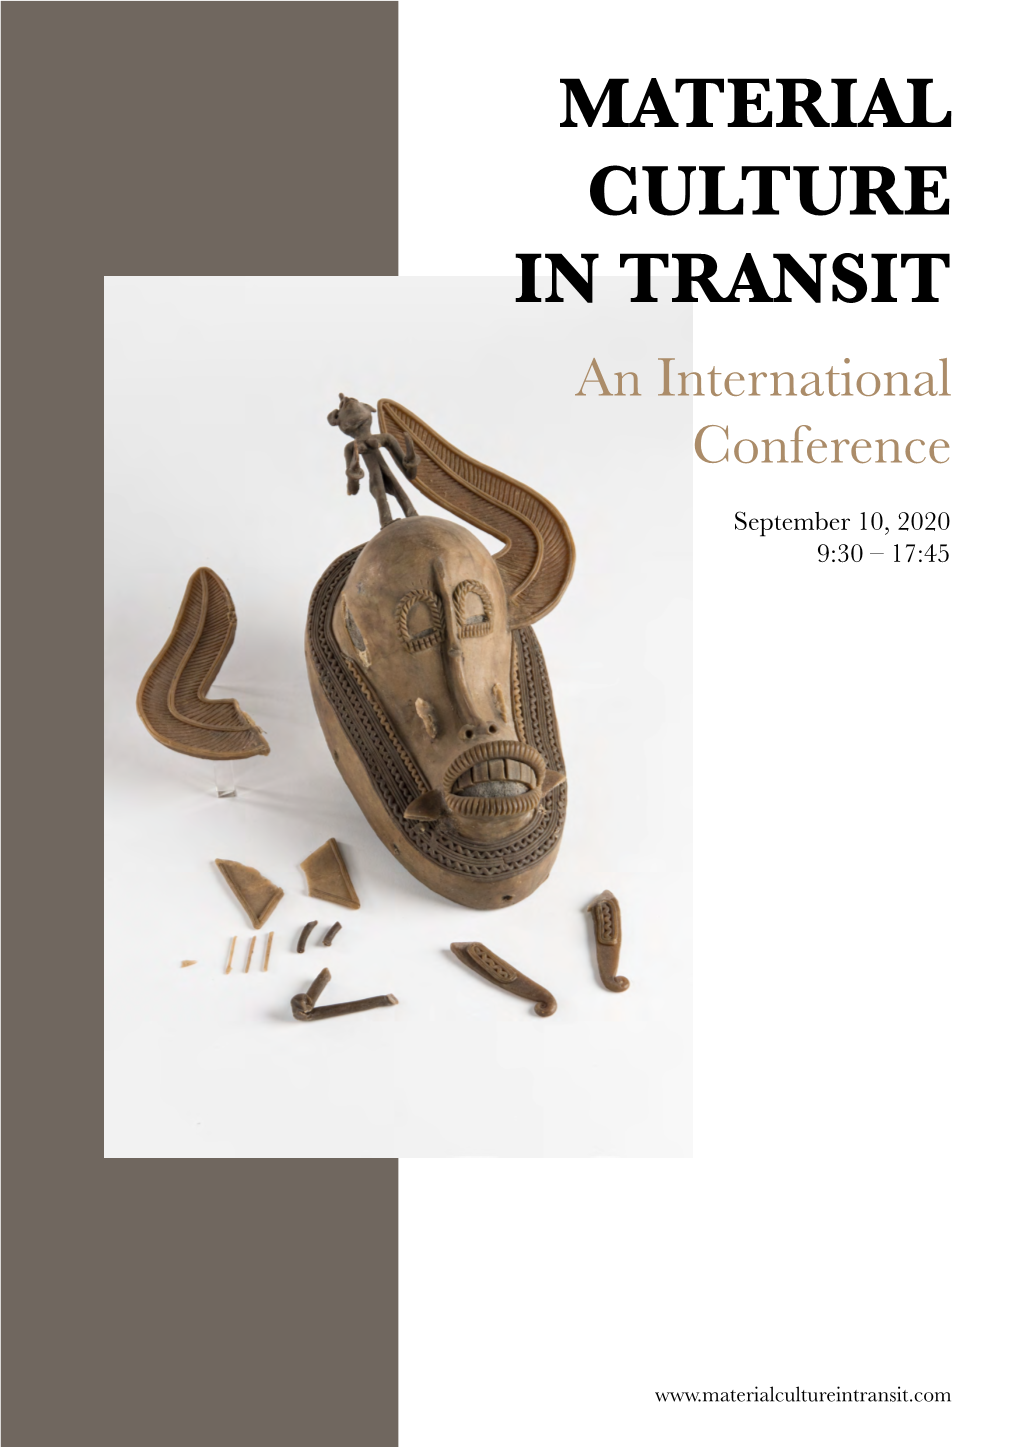 MATERIAL CULTURE in TRANSIT an International Conference